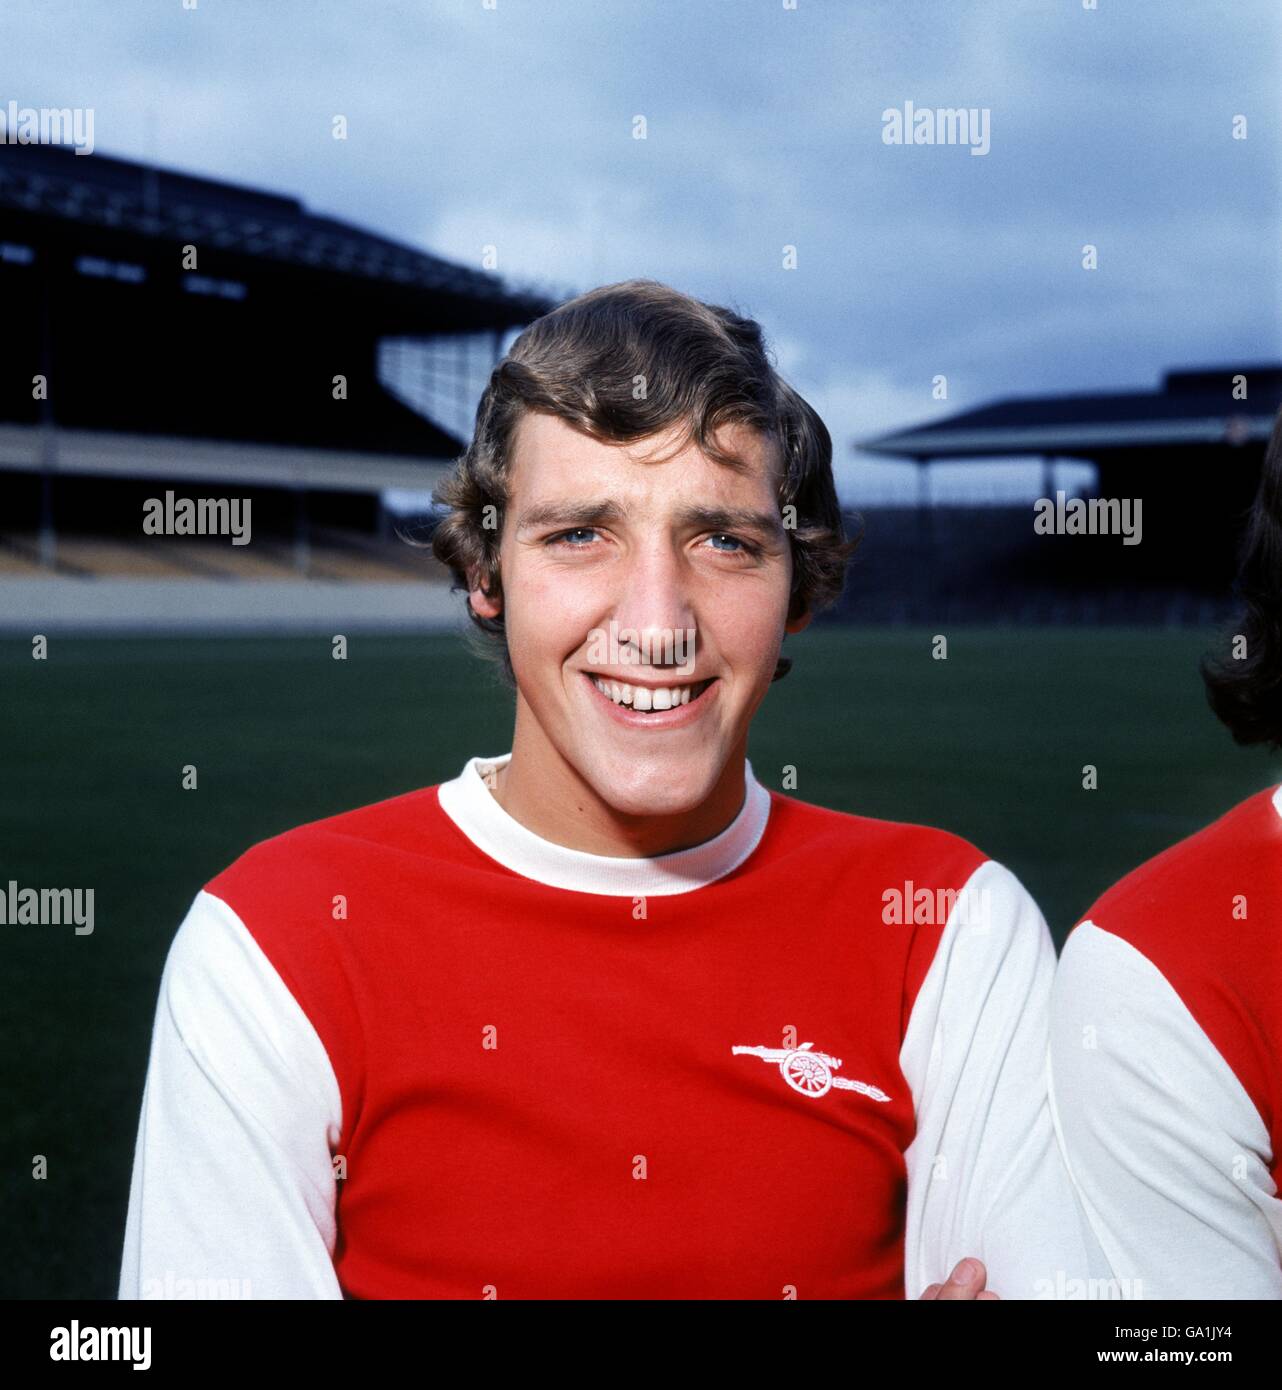 Fußball - Football League Division One - Arsenal Photocall Stockfoto